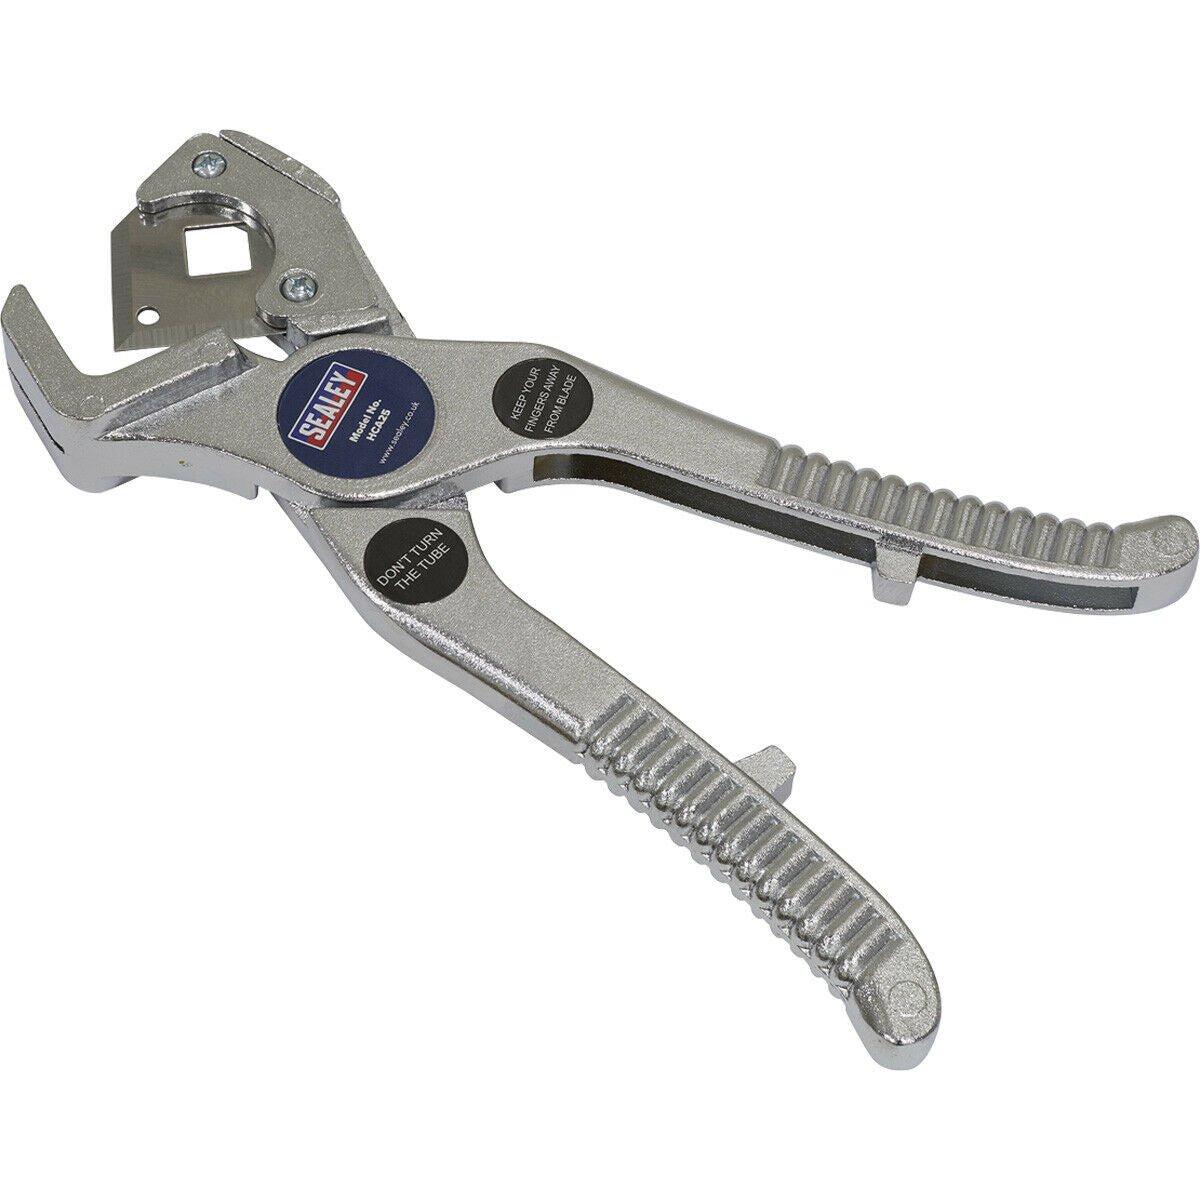 Rubber & Reinforced Hose Cutter - 3mm to 25mm Capacity - Reversible Steel Blade